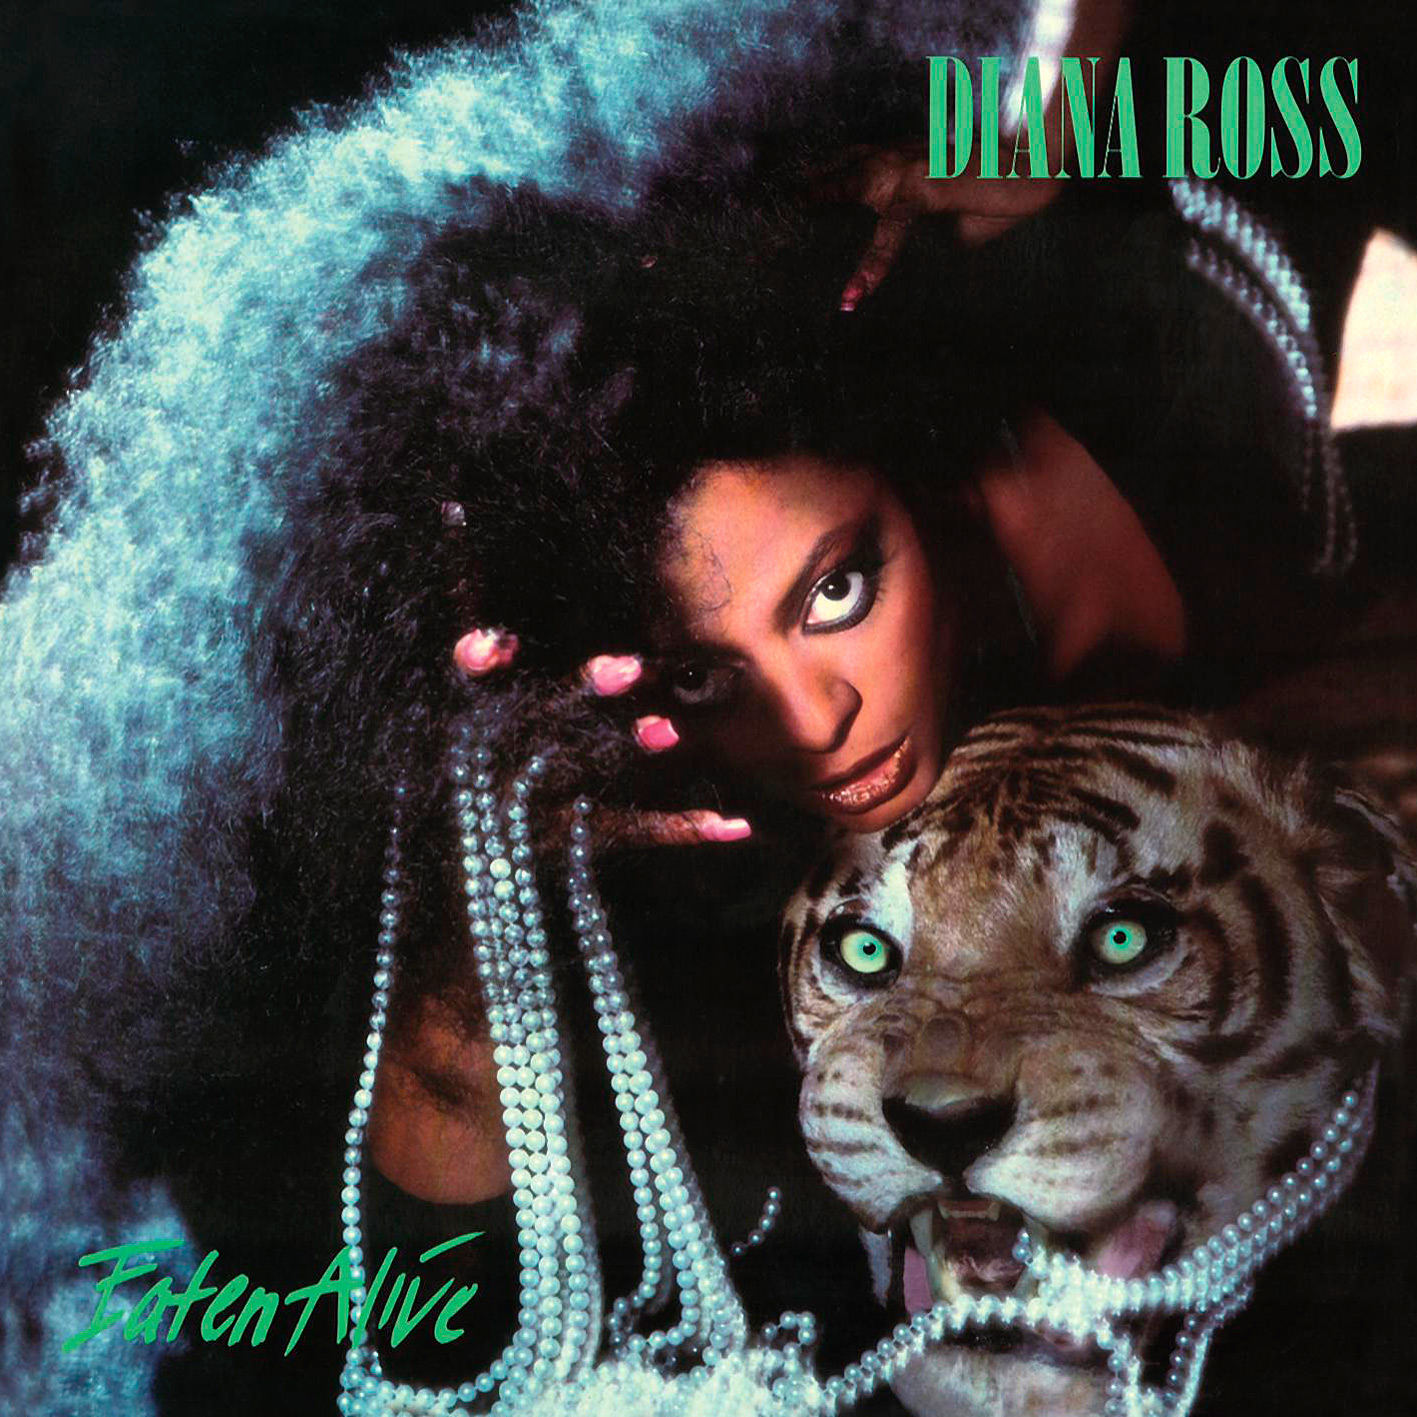 Diana Ross – Eaten Alive {Expanded Edition} (1985/2015) [HDTracks FLAC 24bit/96kHz]